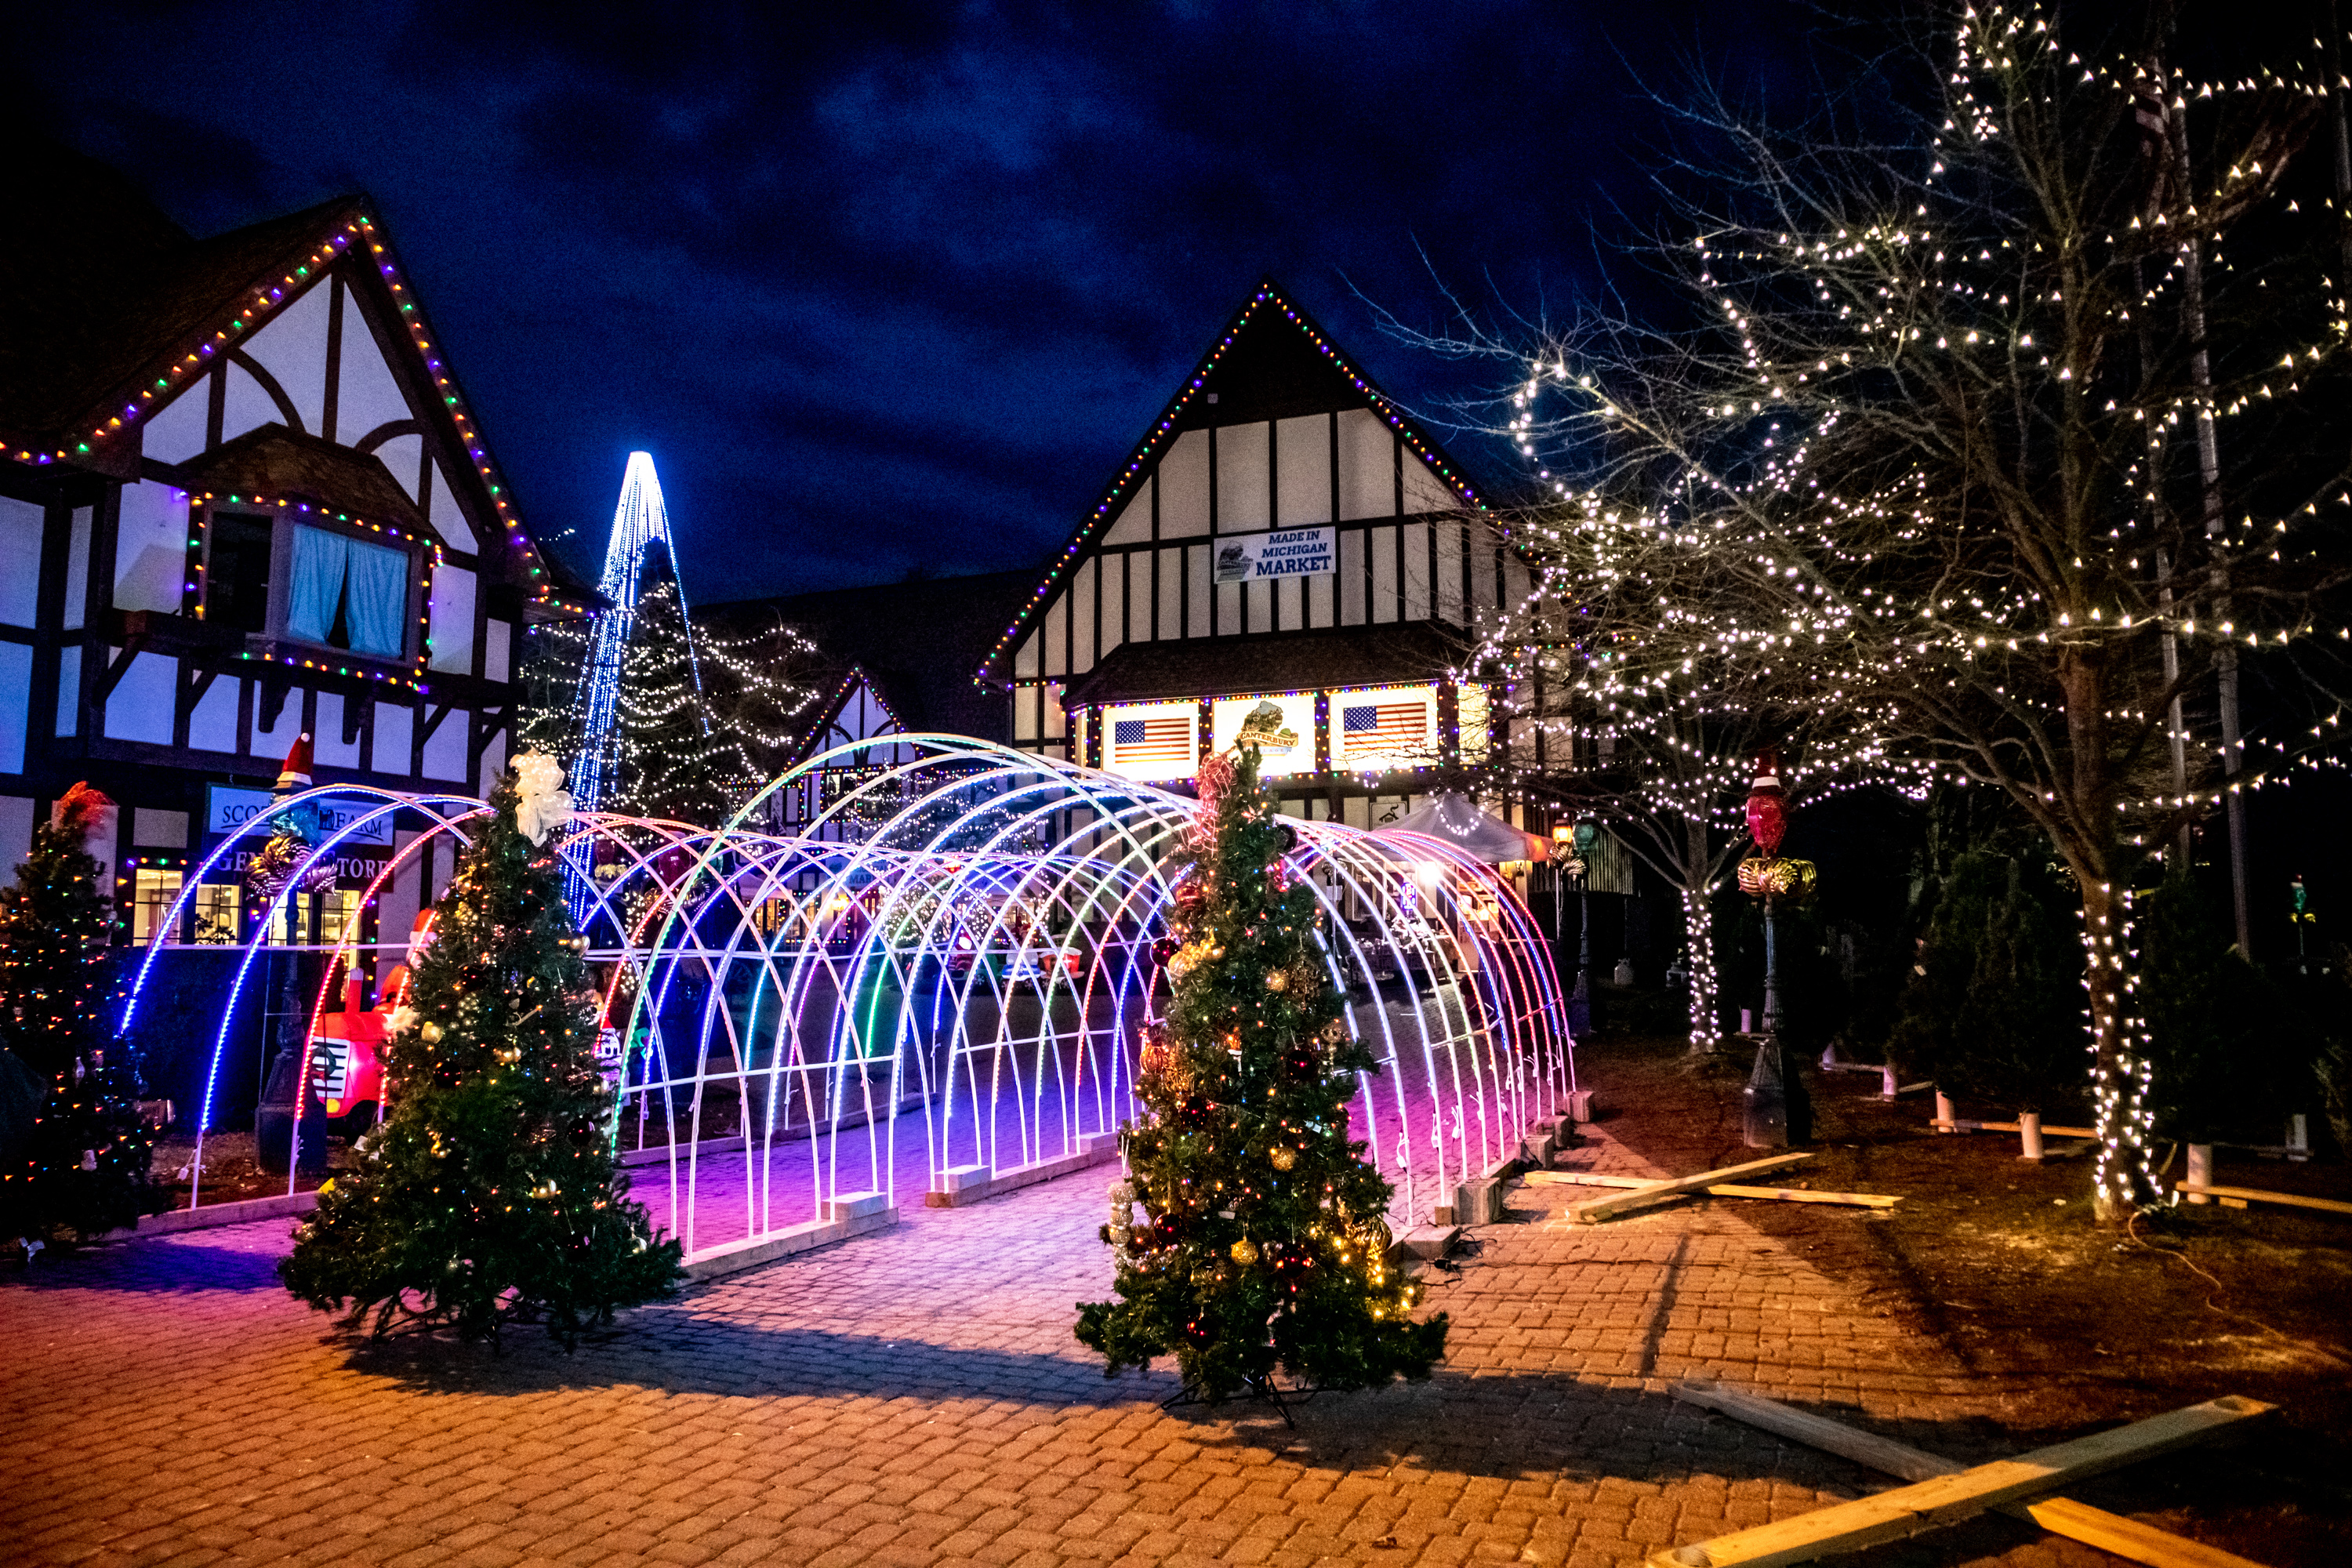 19 of the most epic Christmas displays, events to road trip to in